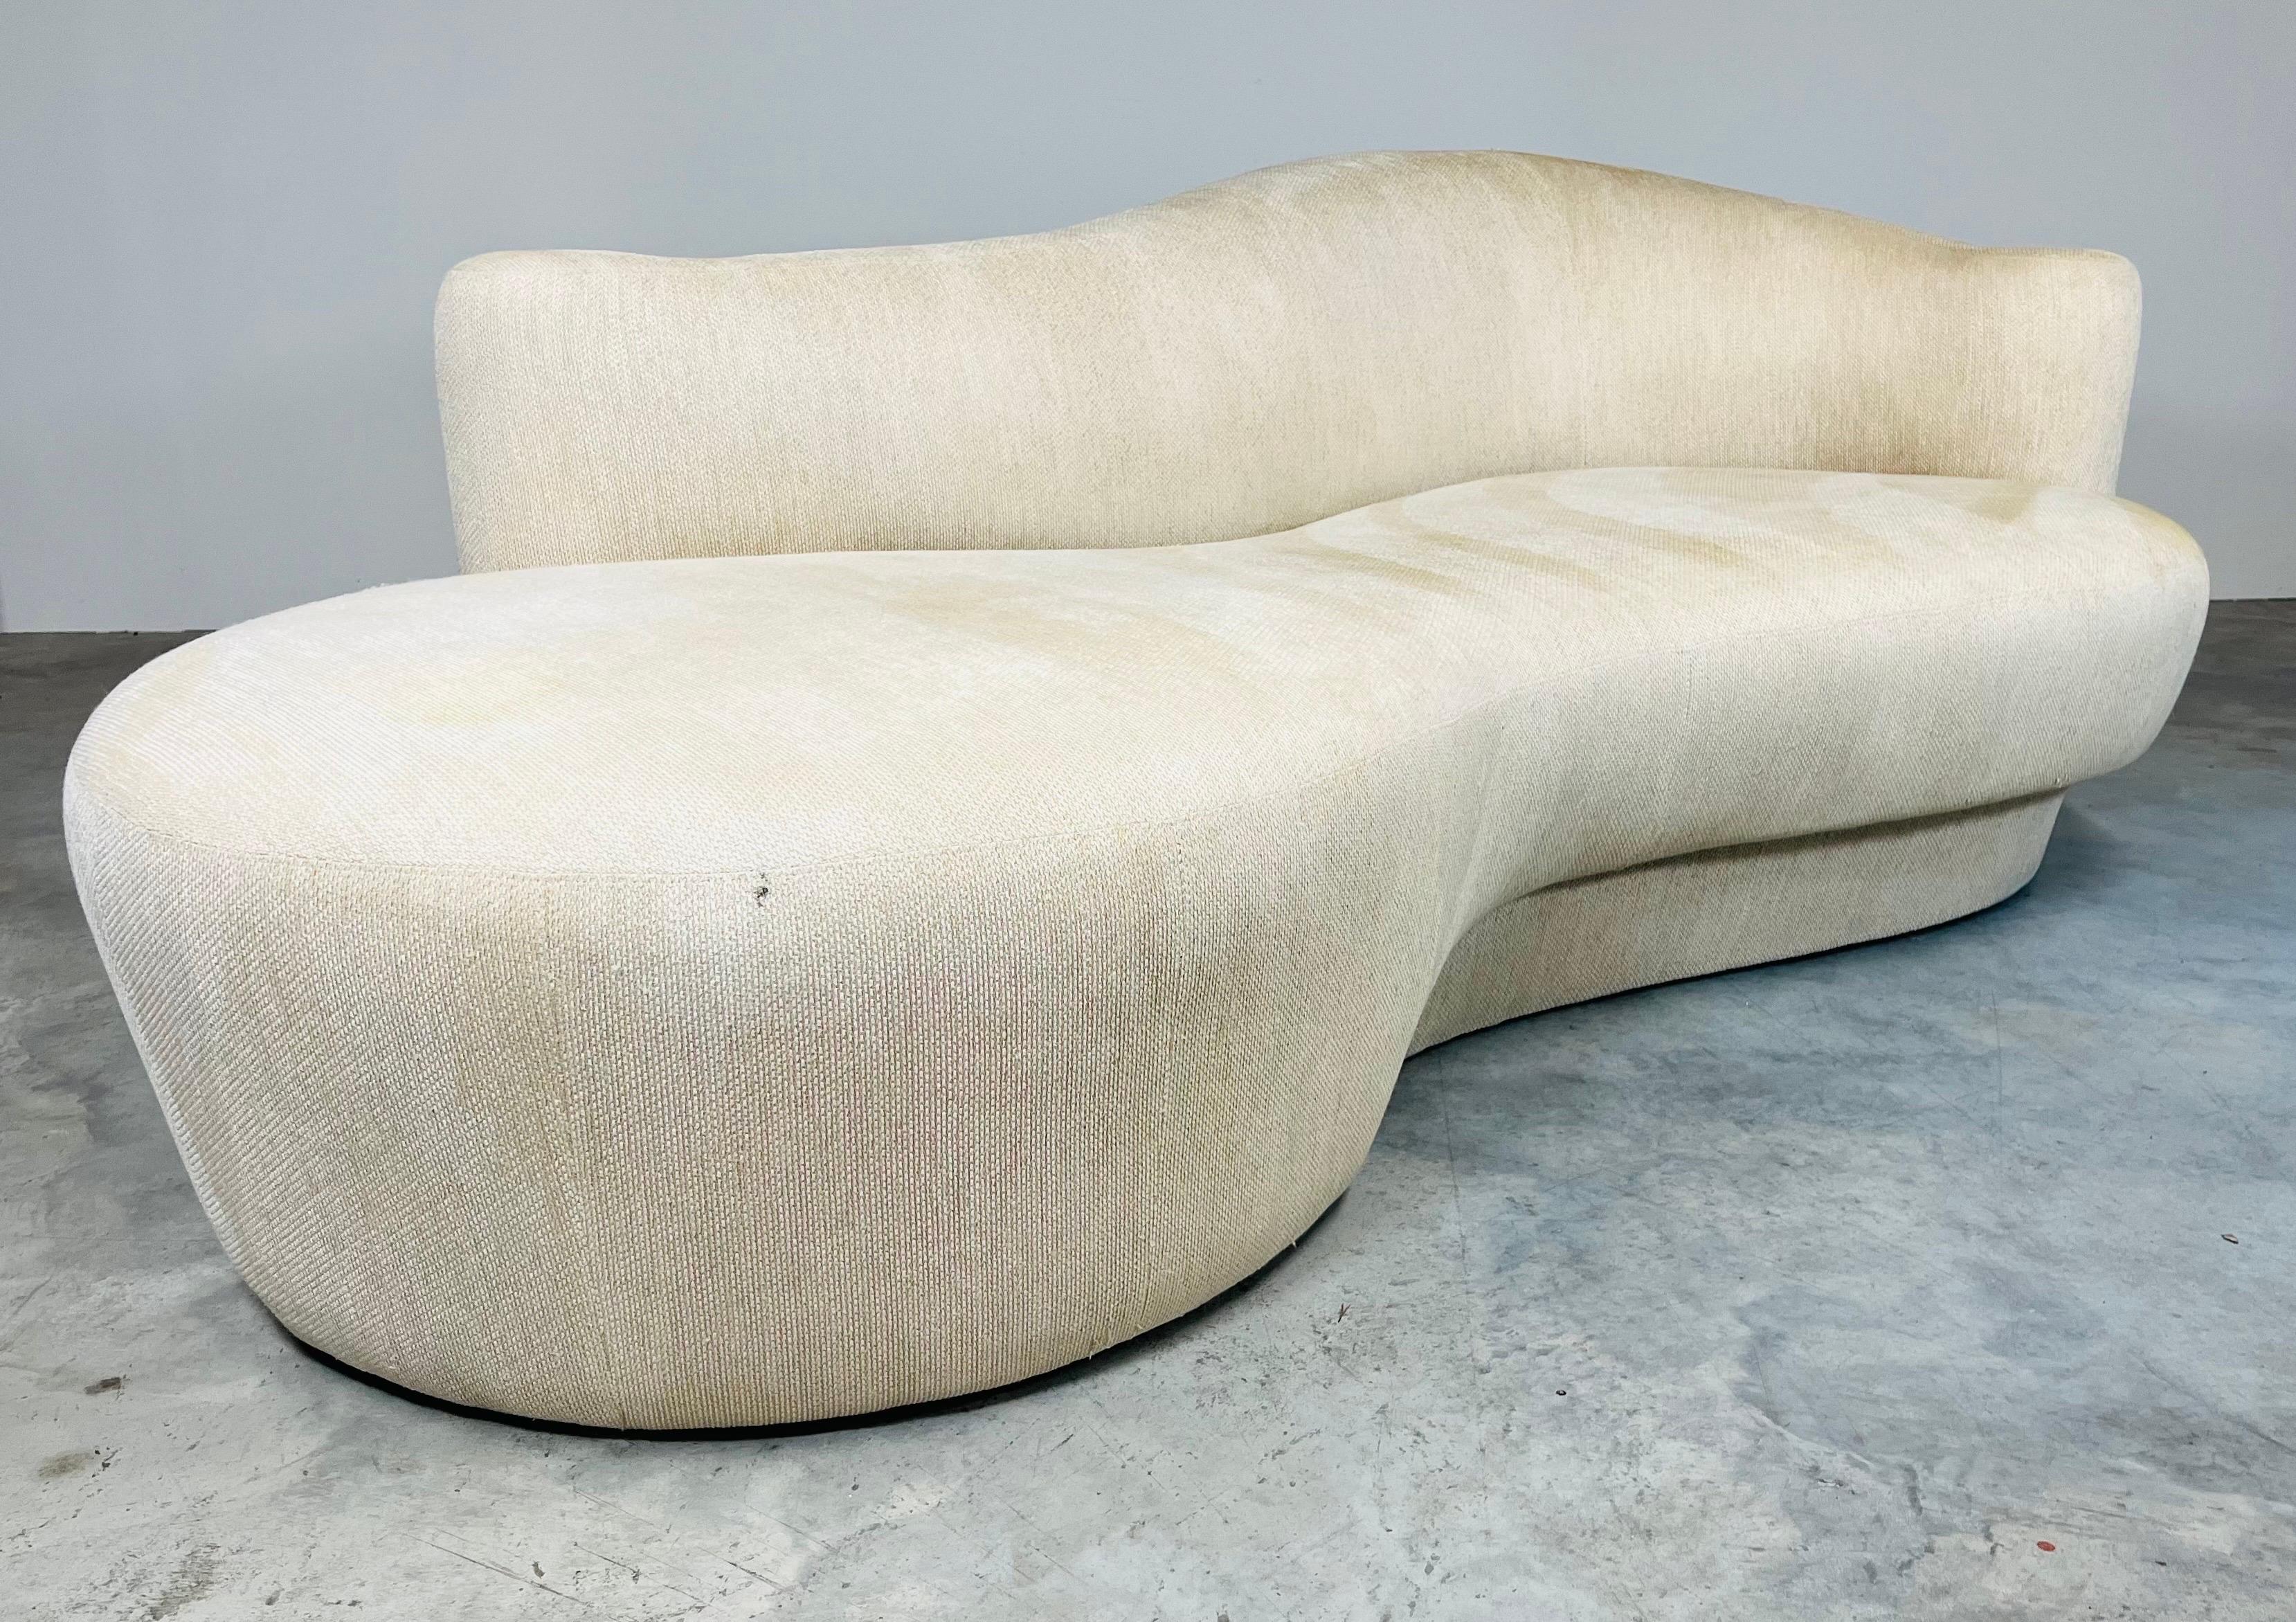 Sculptural cloud sofa chaise by Weiman having glamorous curved sculptural lines with incredibly comfortable design structure. Manufactured by Weiman circa 1990. 
In very good condition aside from some stains by the feet area that didn’t come all the